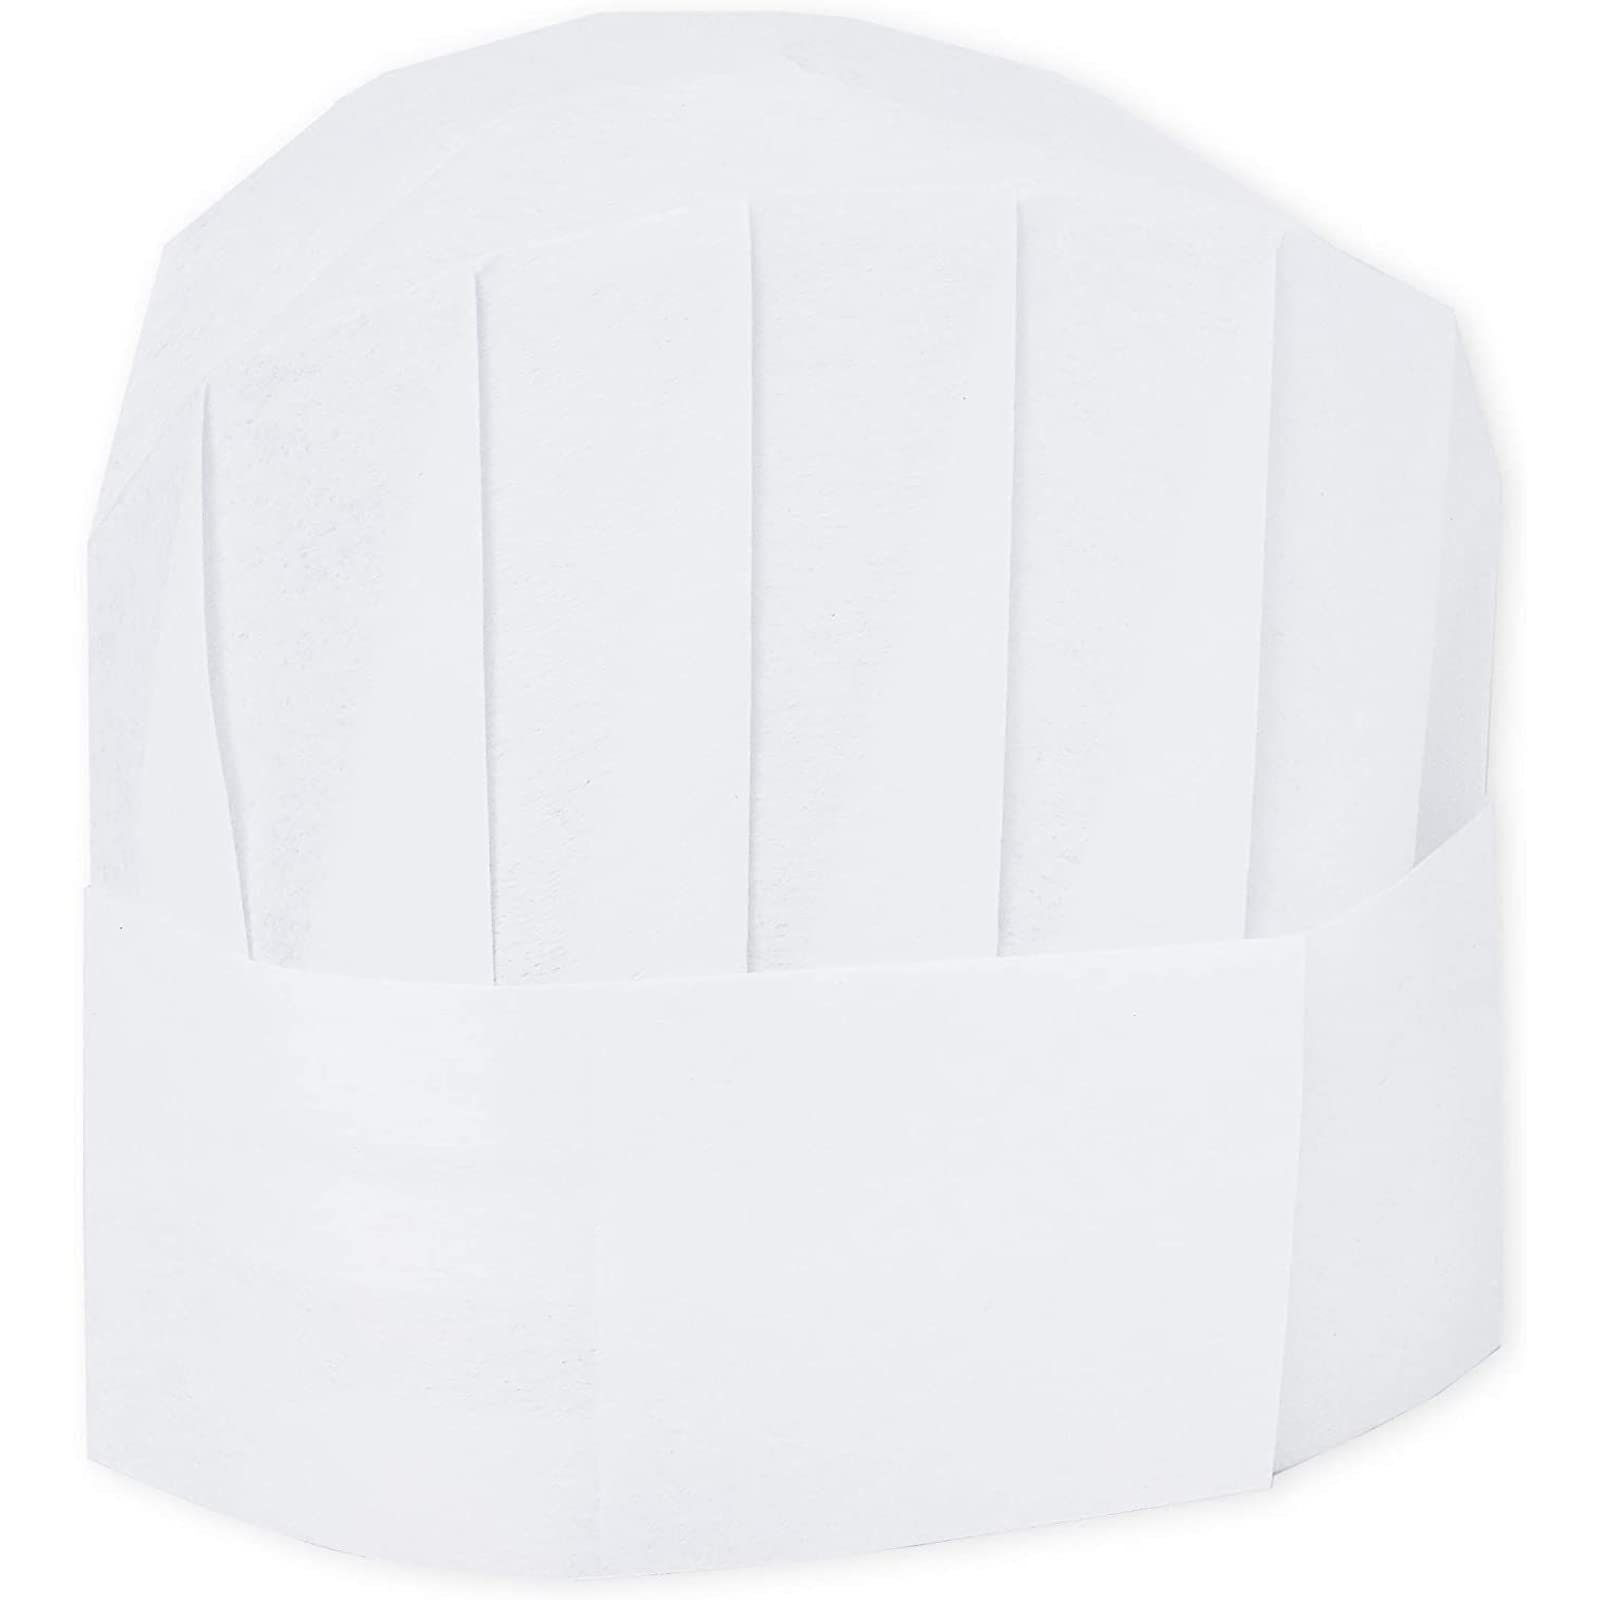 24 Pack Adjustable Chef Hats for Kids and Adults (Non-Woven Fabric, White, 19.6-22.8 in)